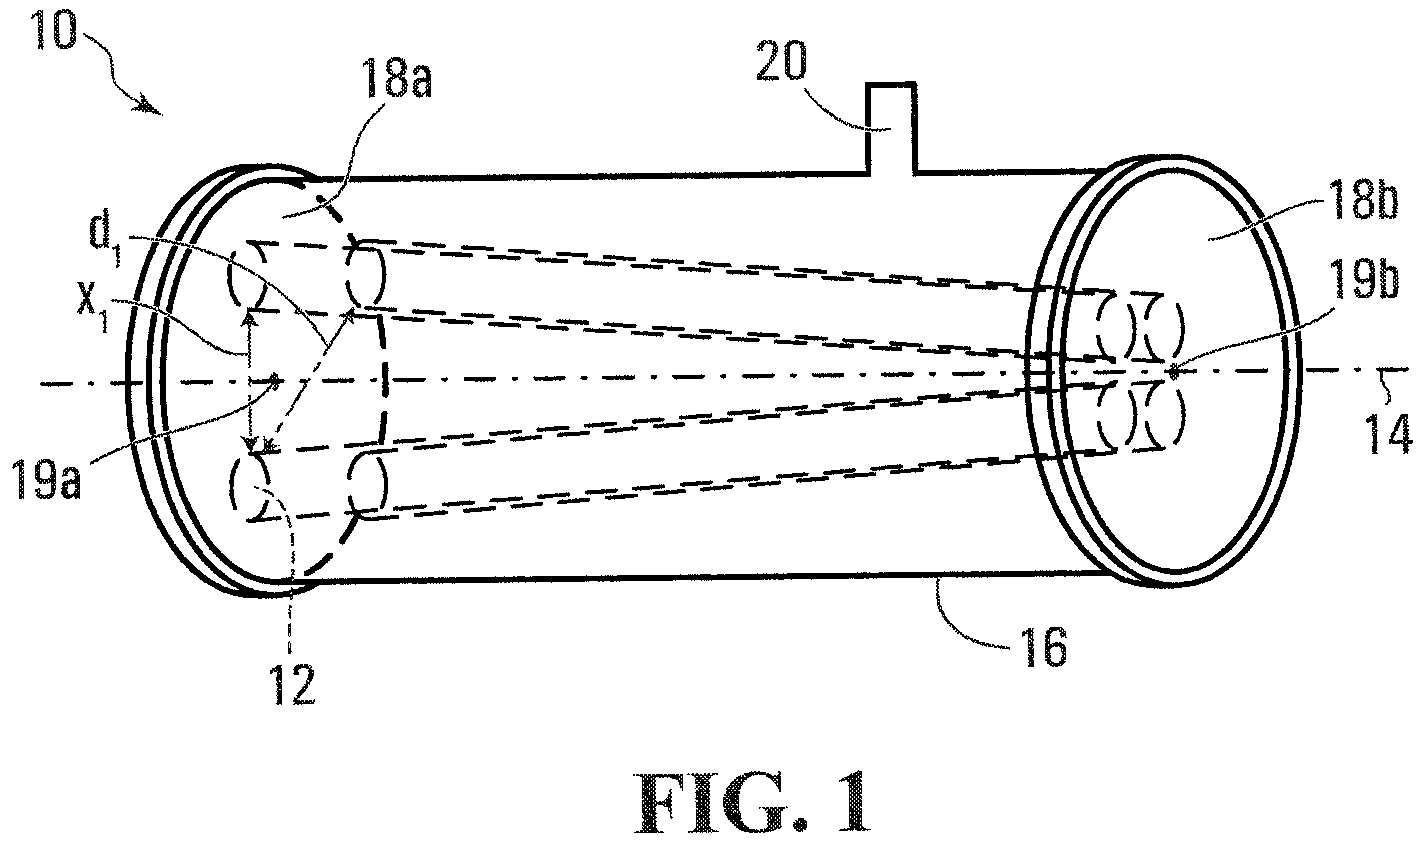 Mass spectrometer ion guide providing axial field, and method